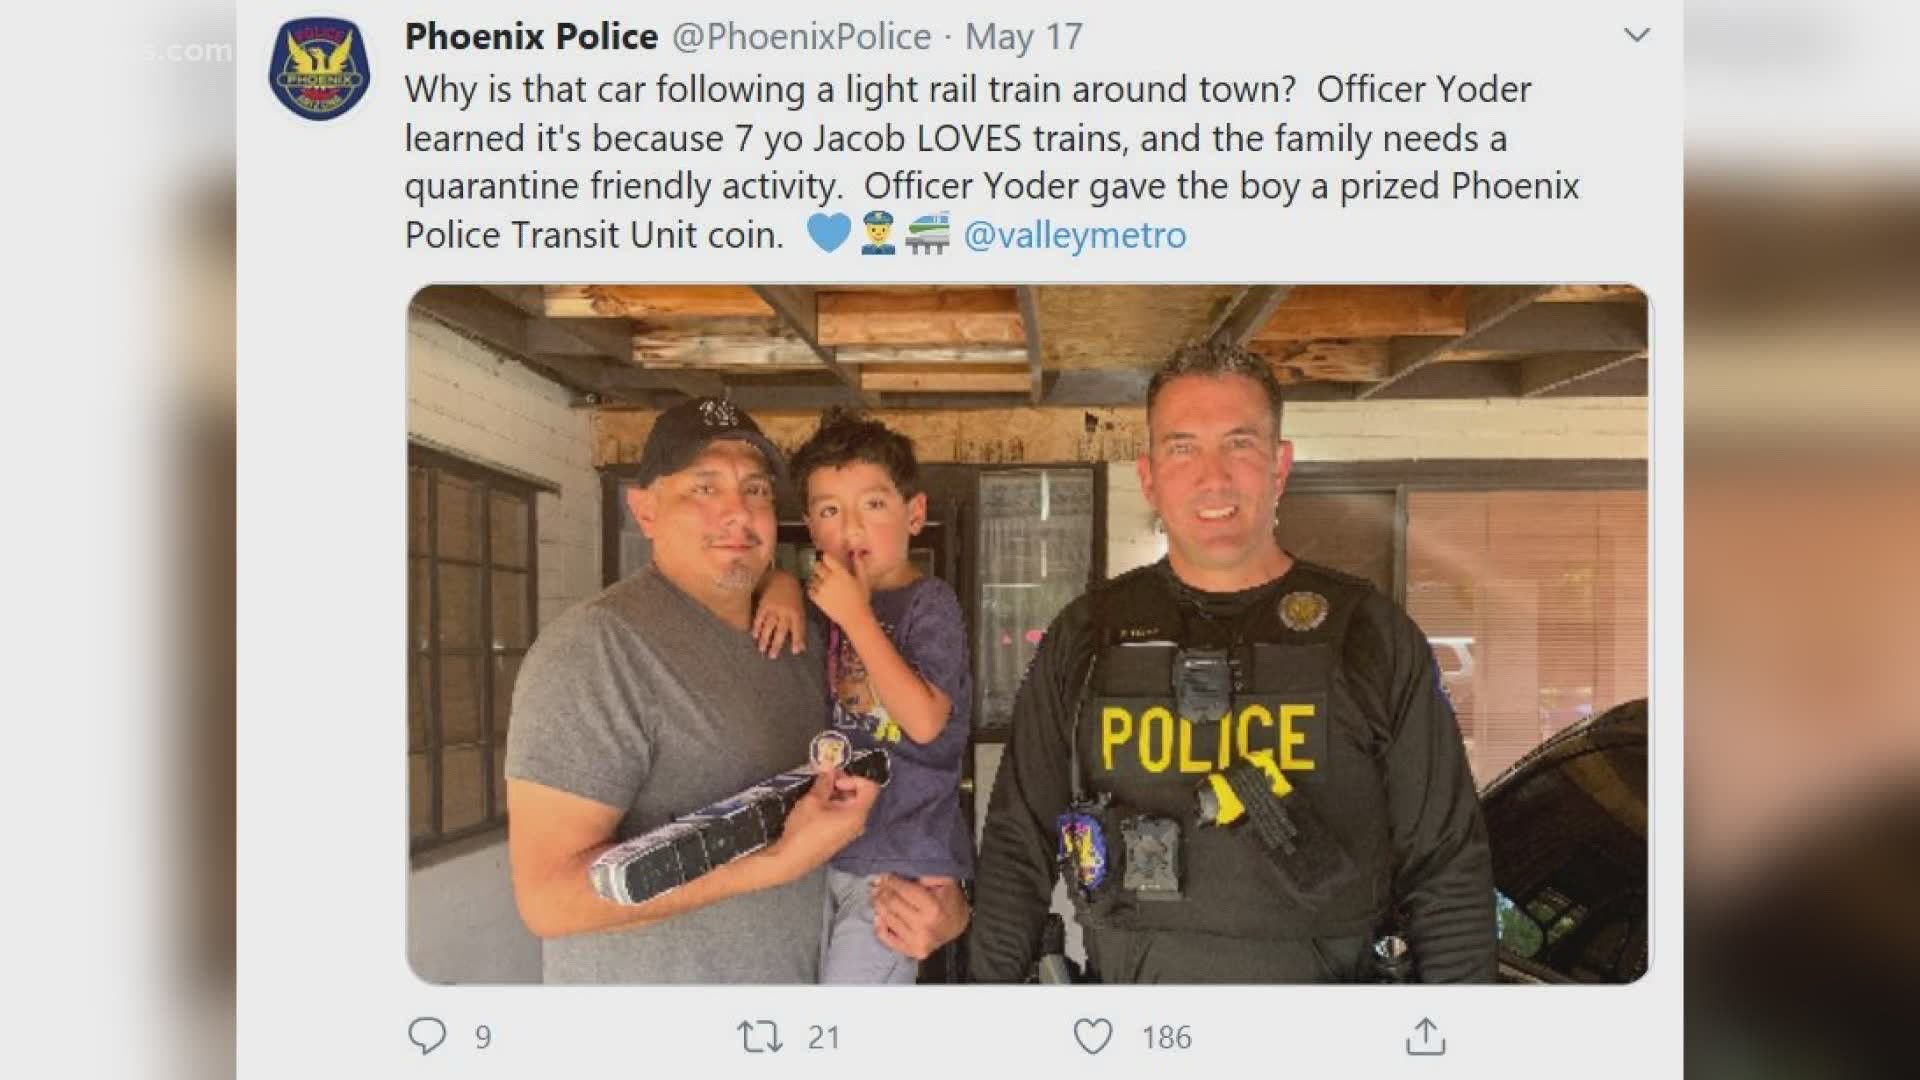 A family wanted to entertain their son, so they drove and followed the light rail. When an officer saw, he gave them a him a Police Unit Transit coin.